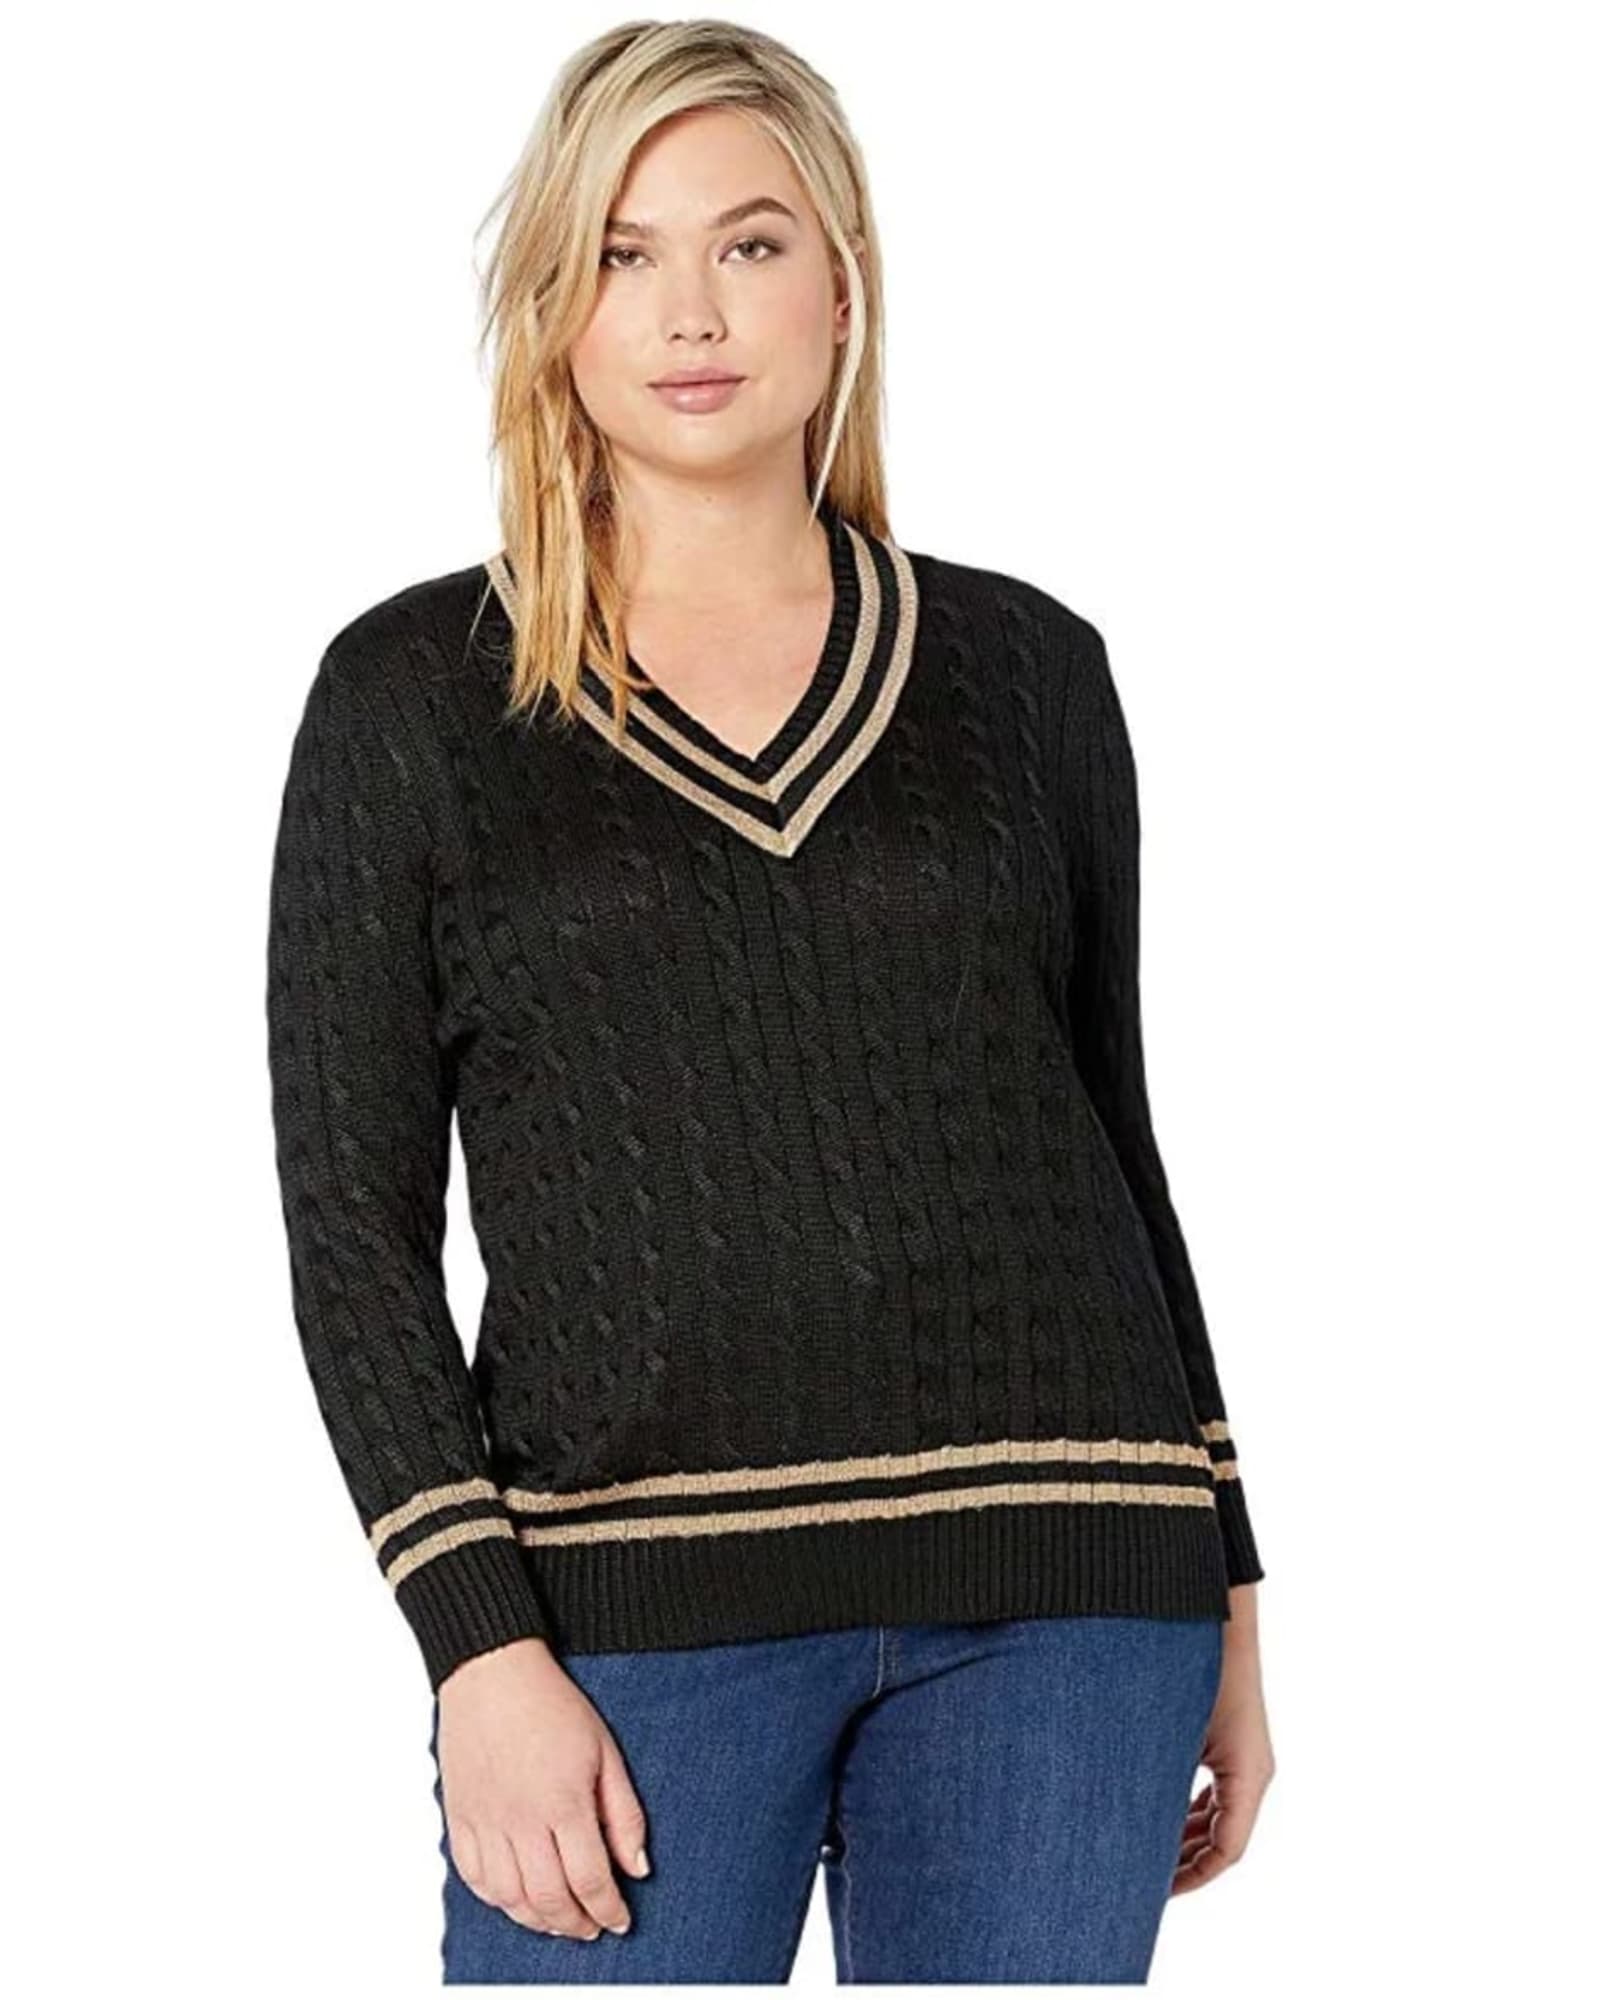 Hi! Does anyone know if the Ayla Cable Knit Zip-Up Sweater is soft